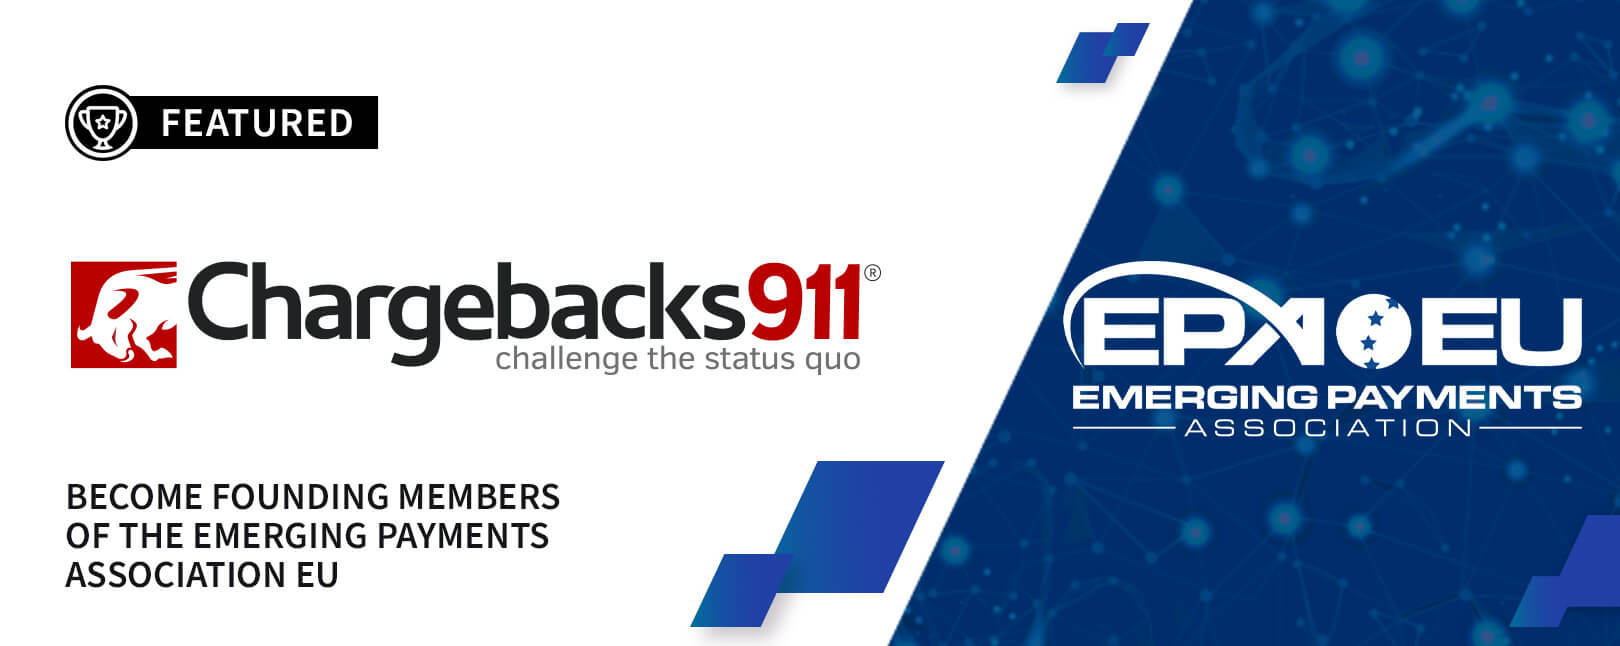 Chargebacks911® are Founding Members of the Emerging Payments Association EU